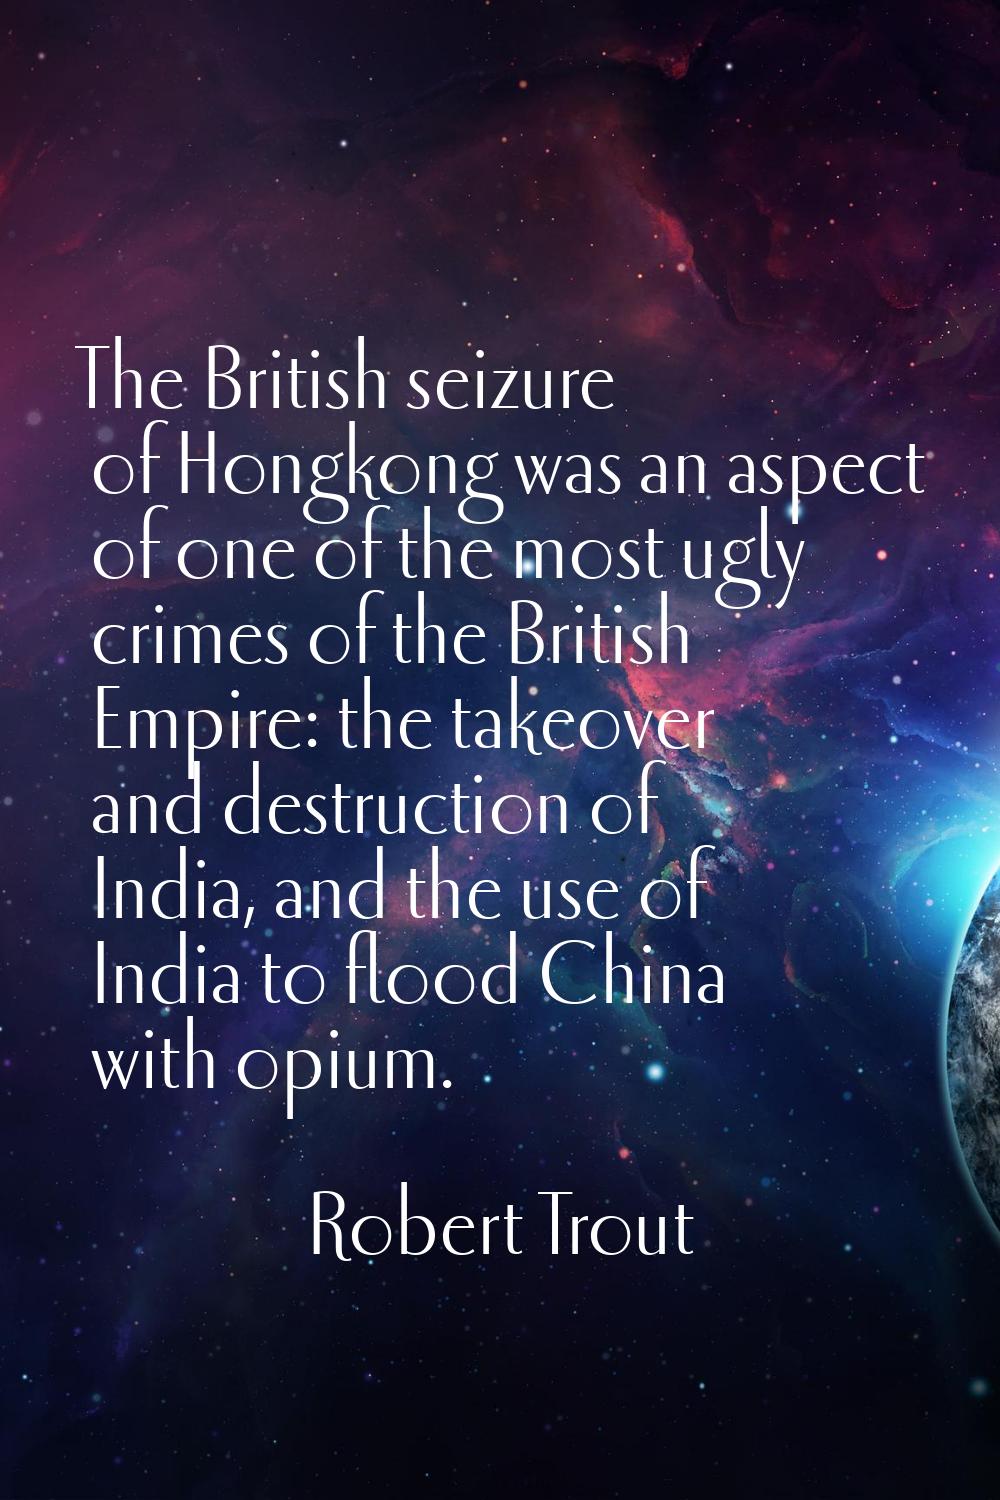 The British seizure of Hongkong was an aspect of one of the most ugly crimes of the British Empire: